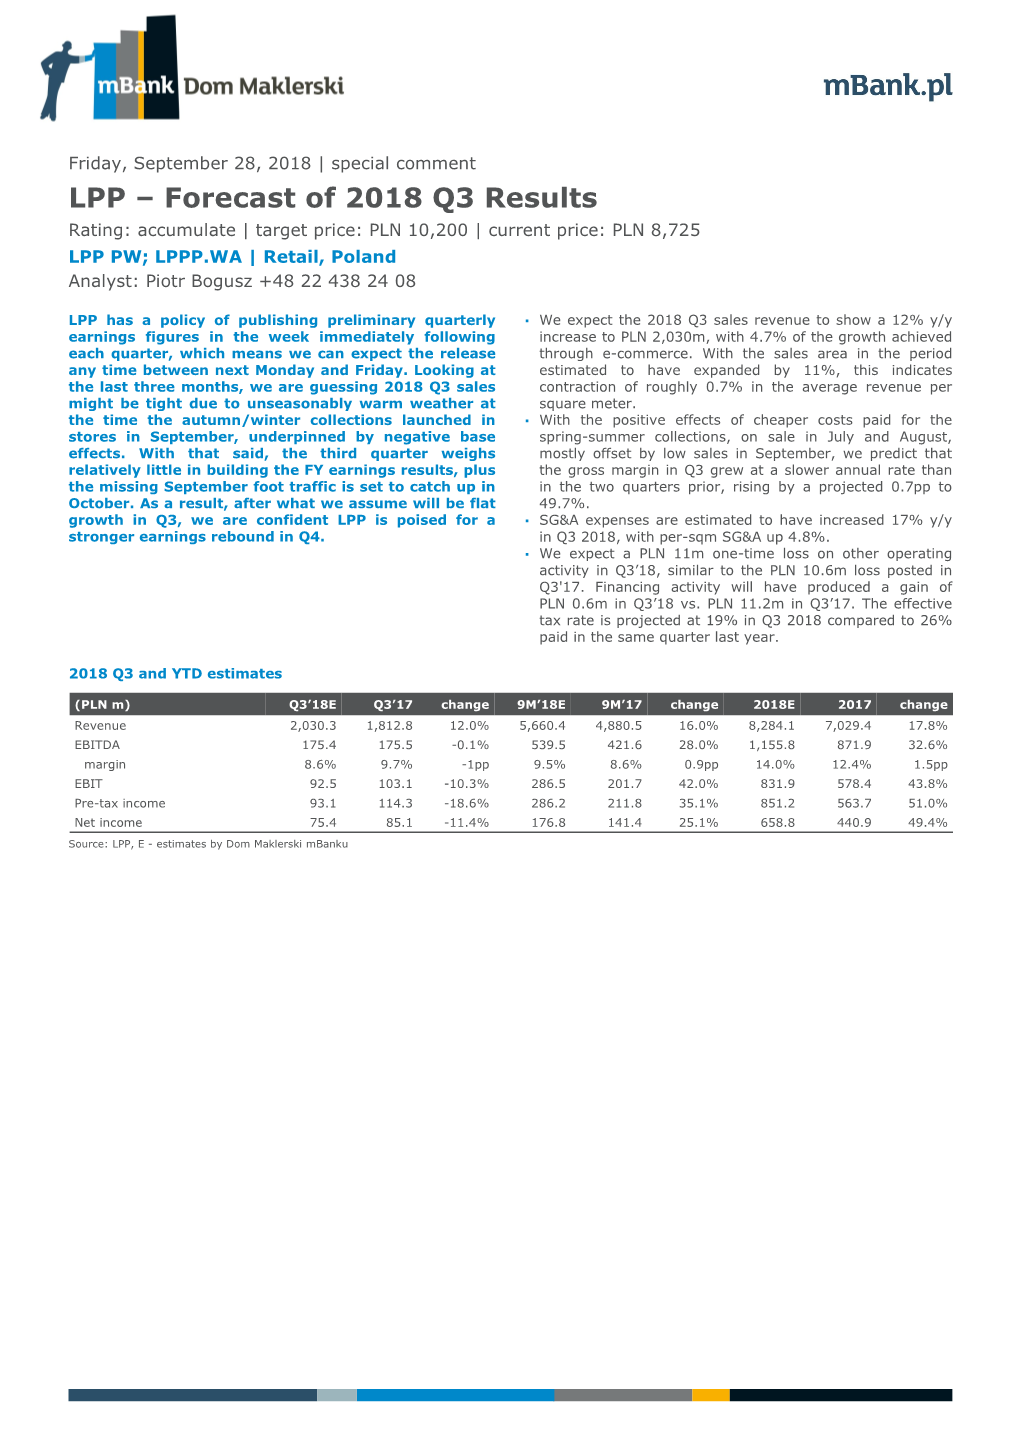 LPP – Forecast of 2018 Q3 Results